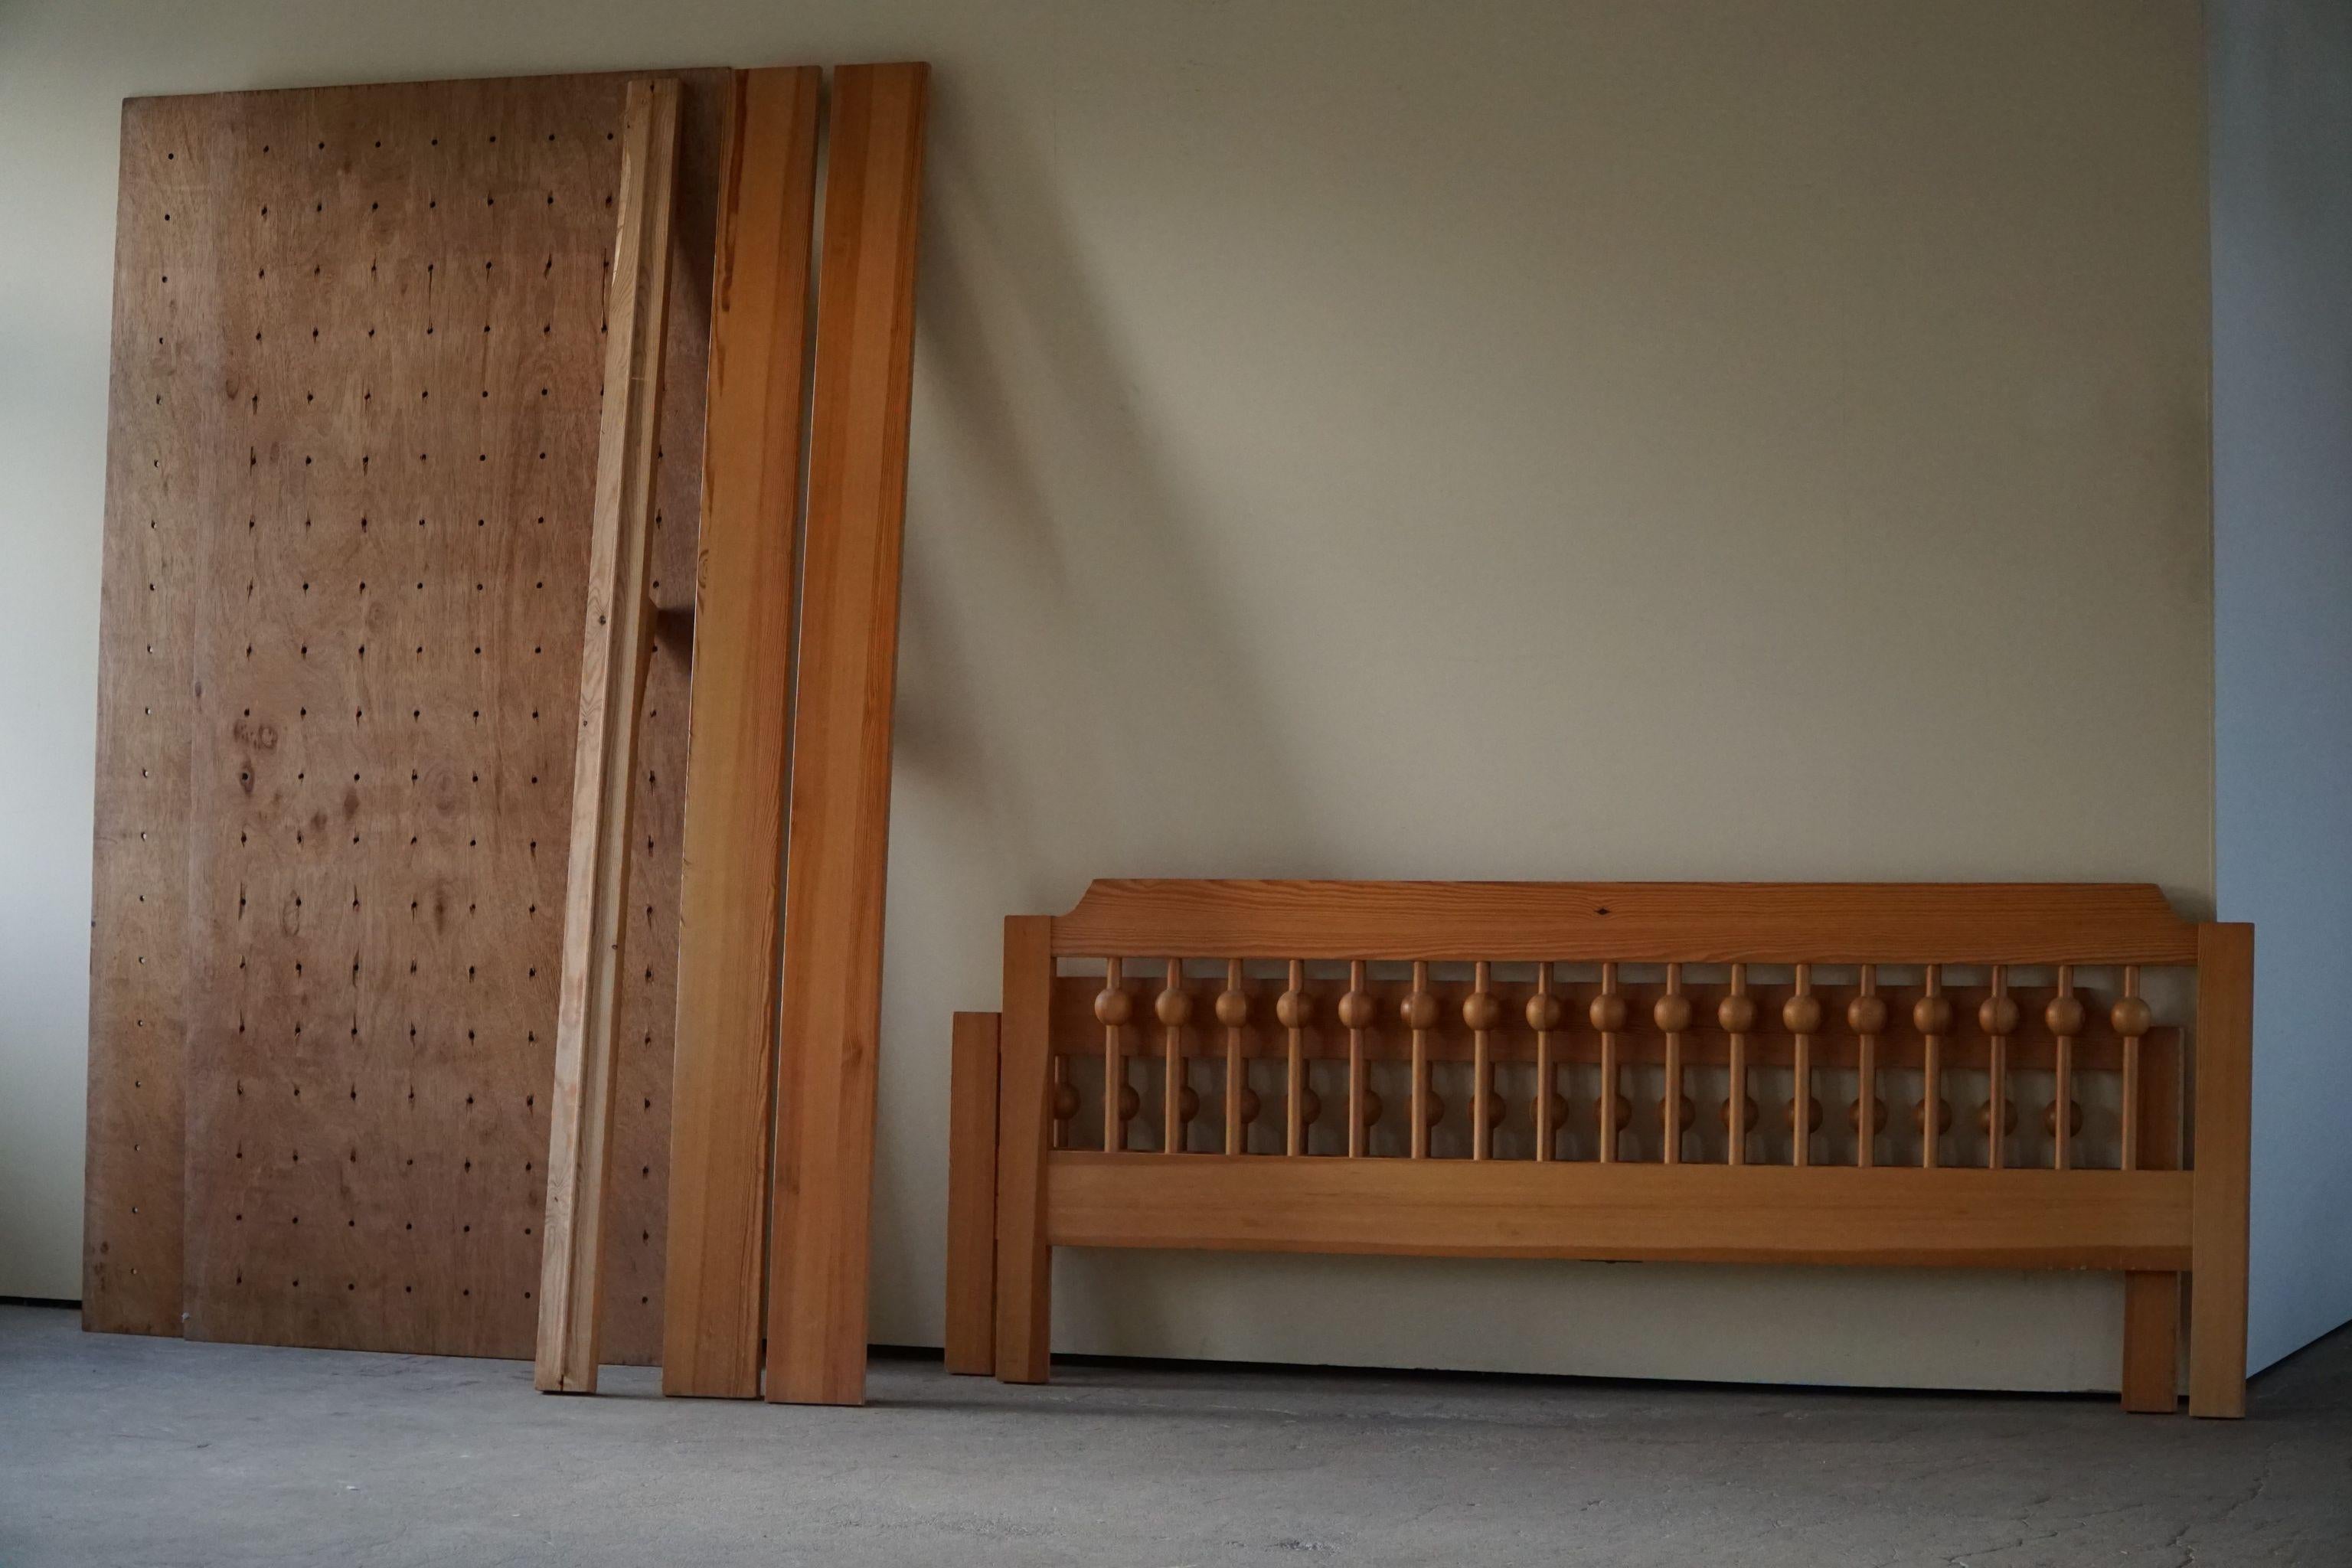 Swedish Modern Sculptural Bed in Pine, Made by Sven Larsson, 1960s For Sale 4